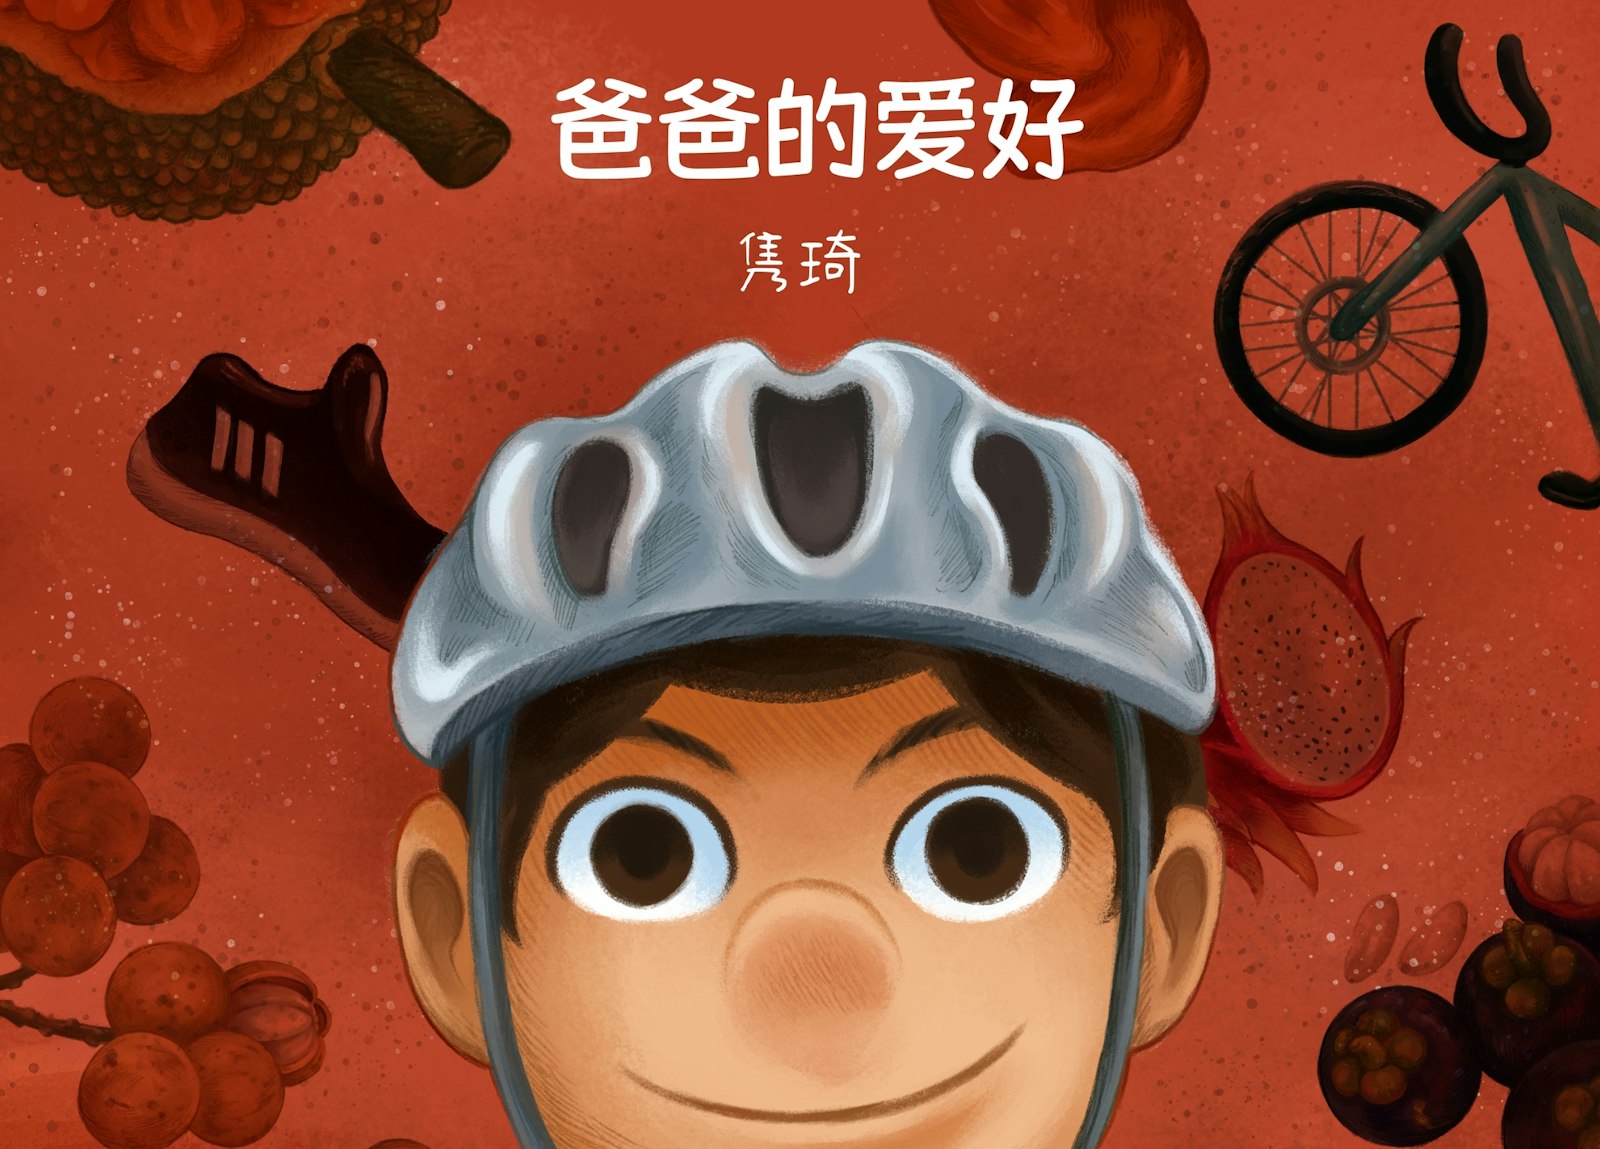 Book cover of Daddy's Hobby, digital illustration showing a close-up of a man's head alongside silhouettes of cycling equipment and fruits.